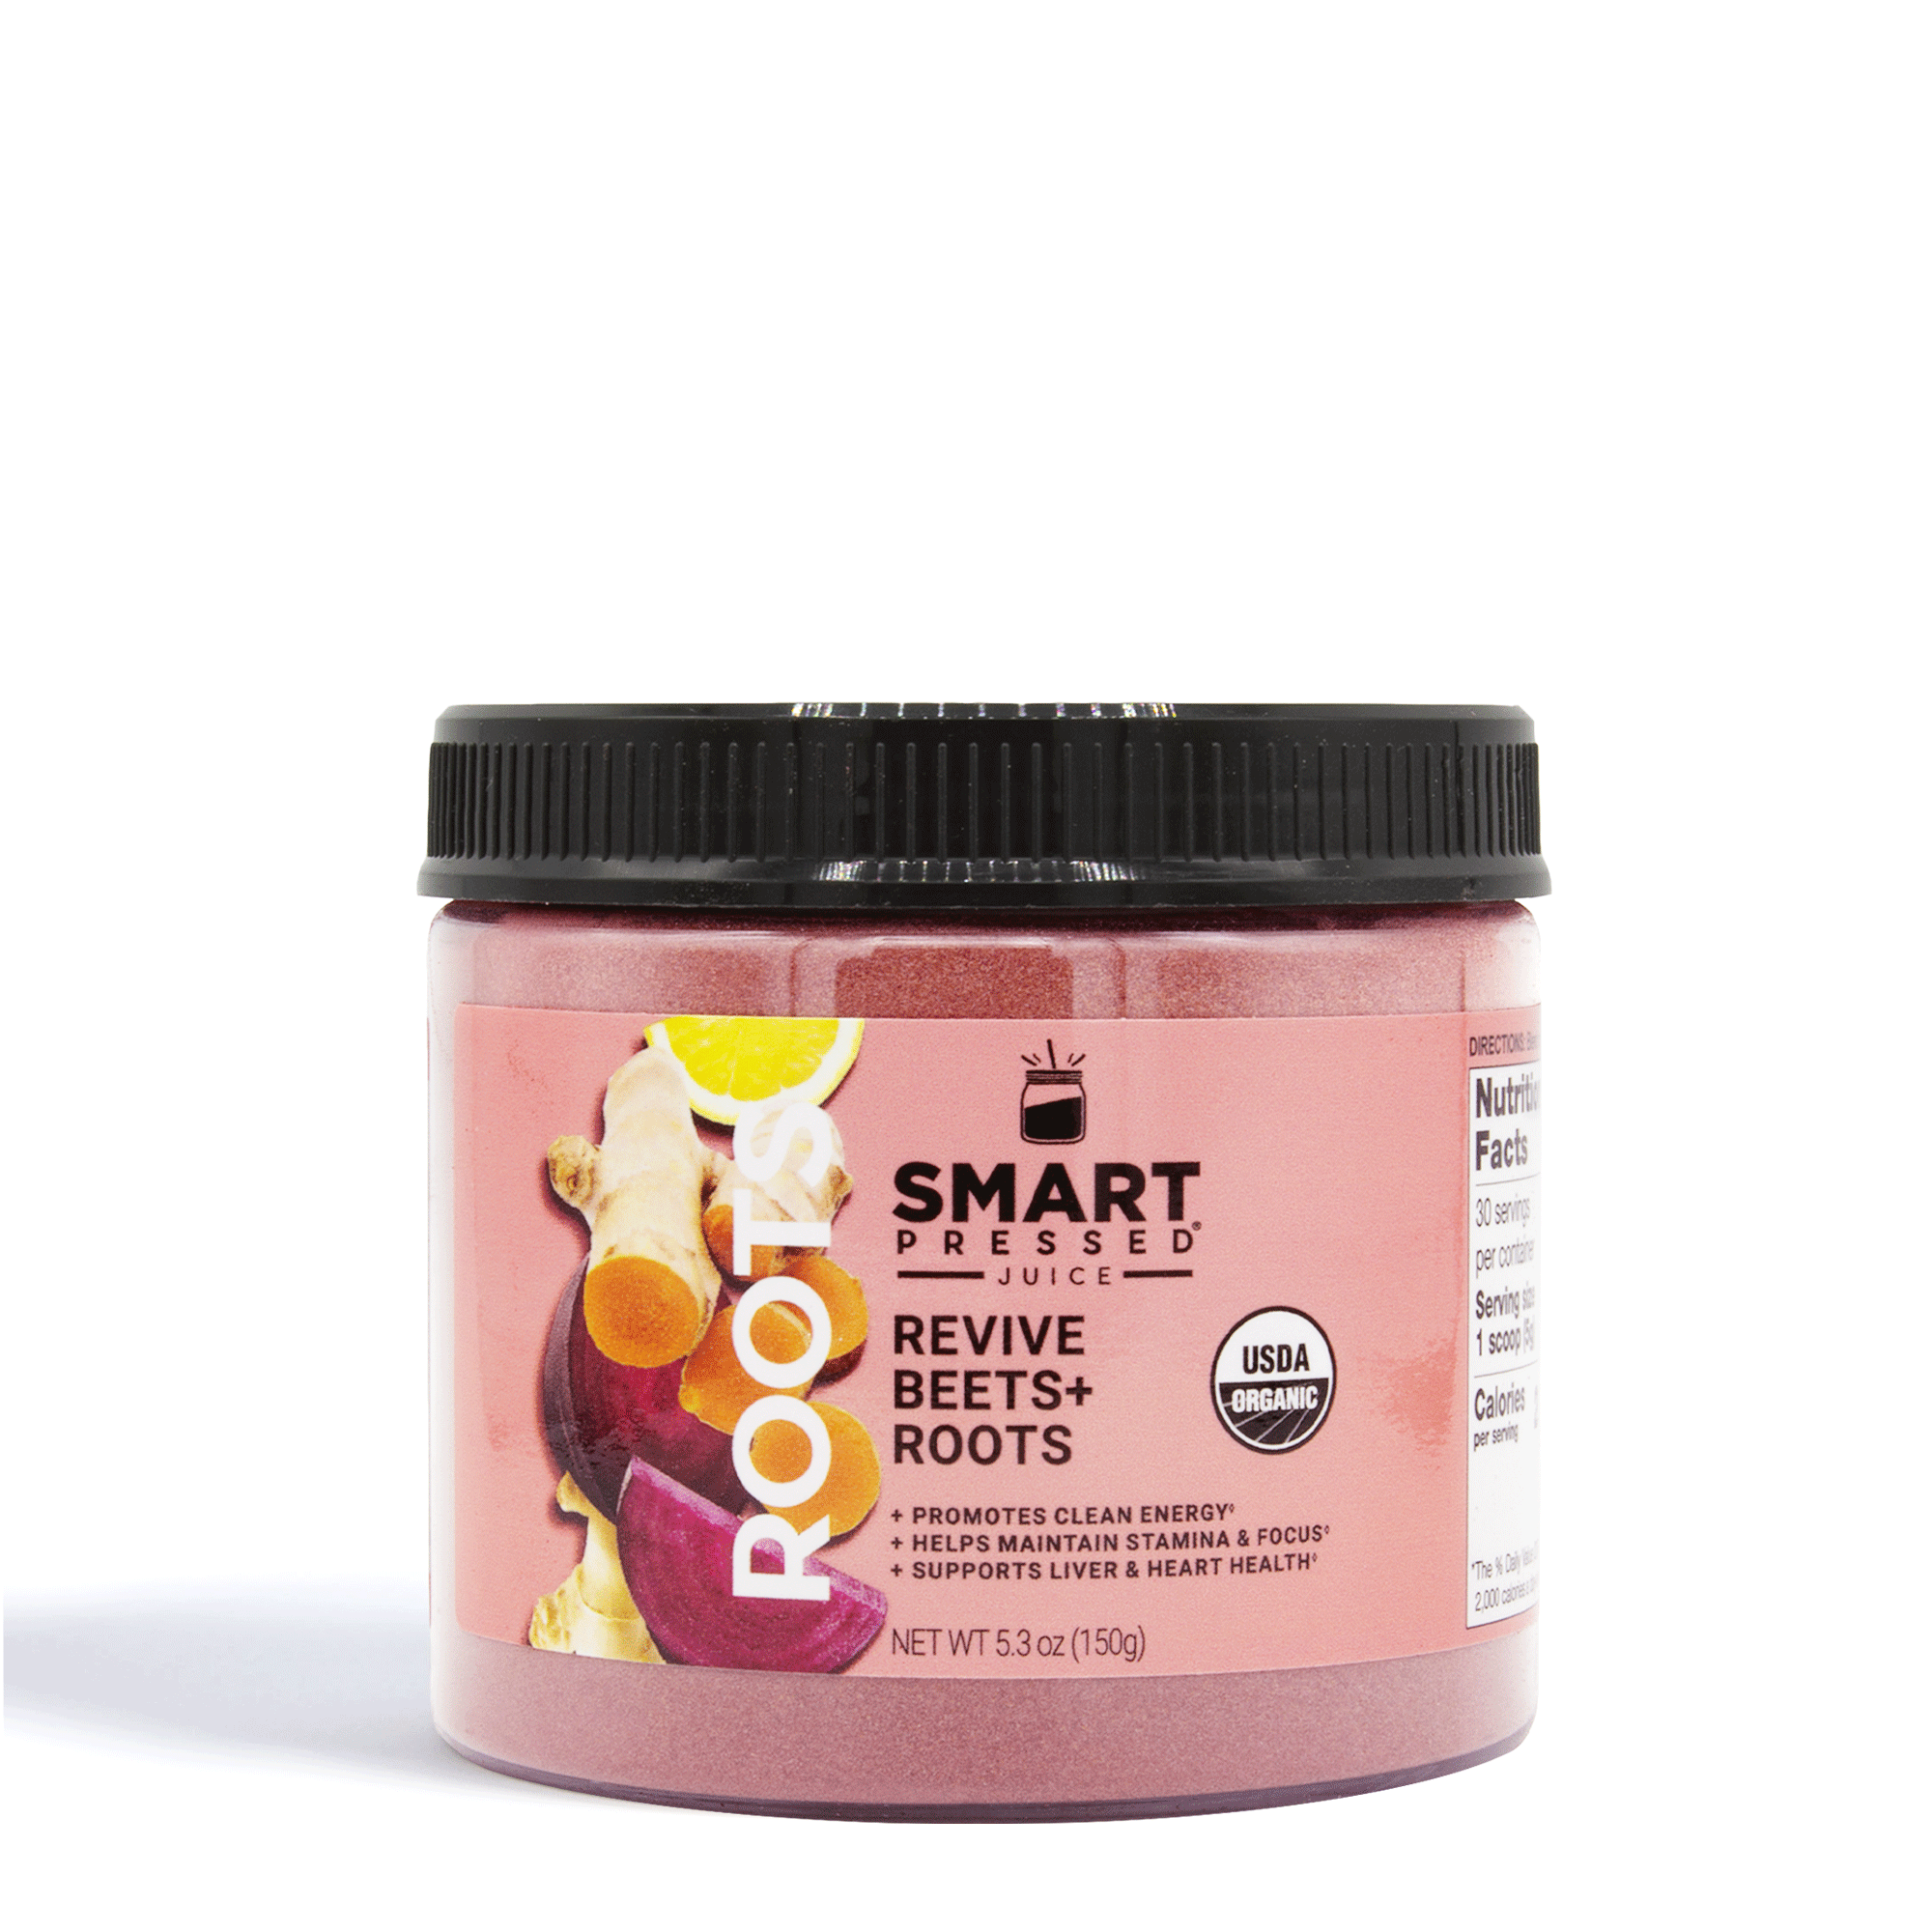 1 jar of 150 grams of Revive Beet+Roots against a white background.